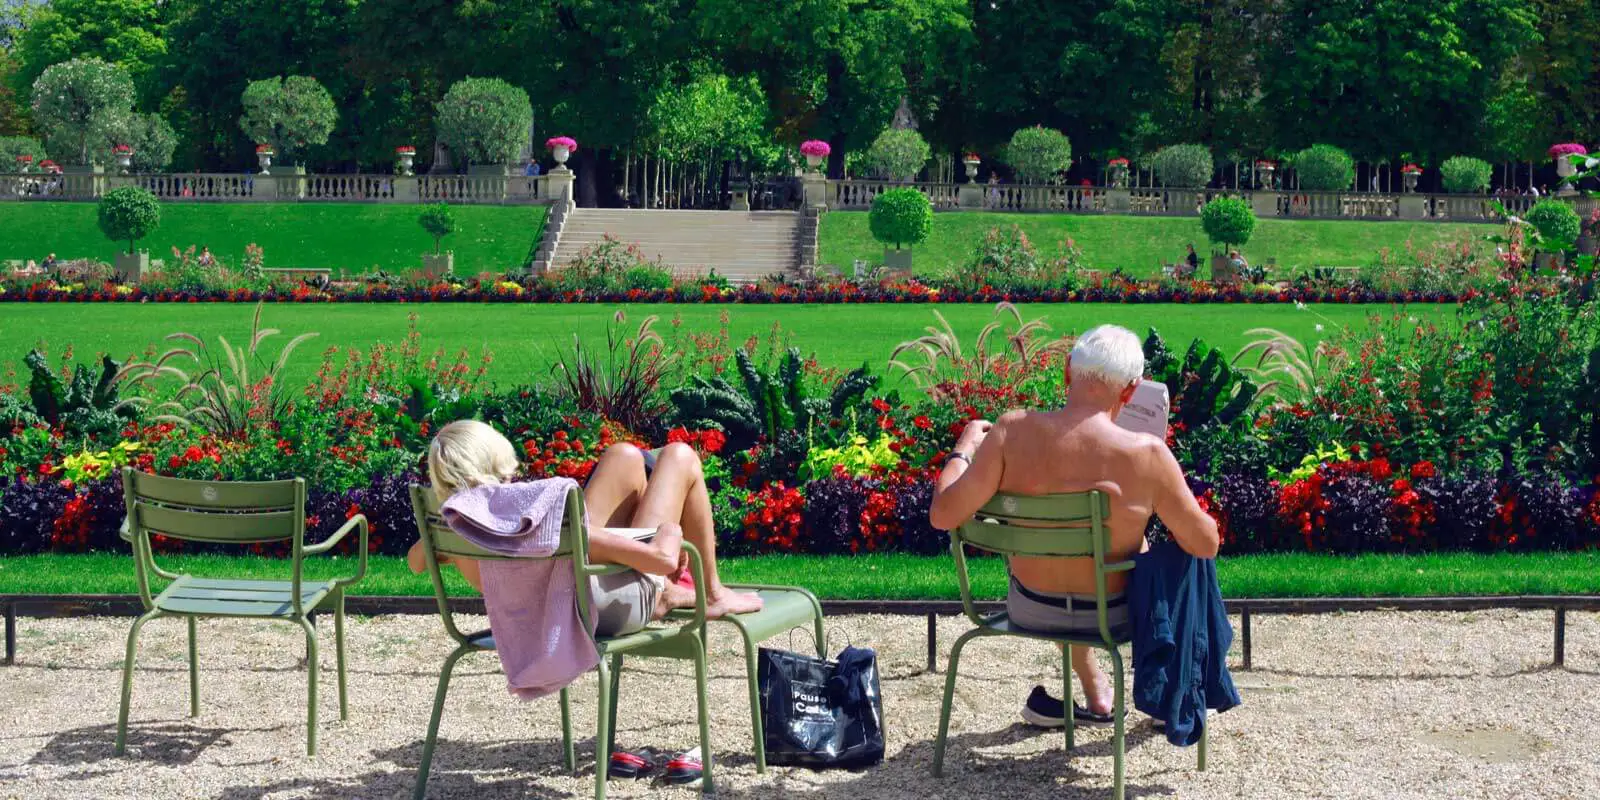 Woman and man enjoying a warm day in Le Jardin du Luxembourg in Paris.